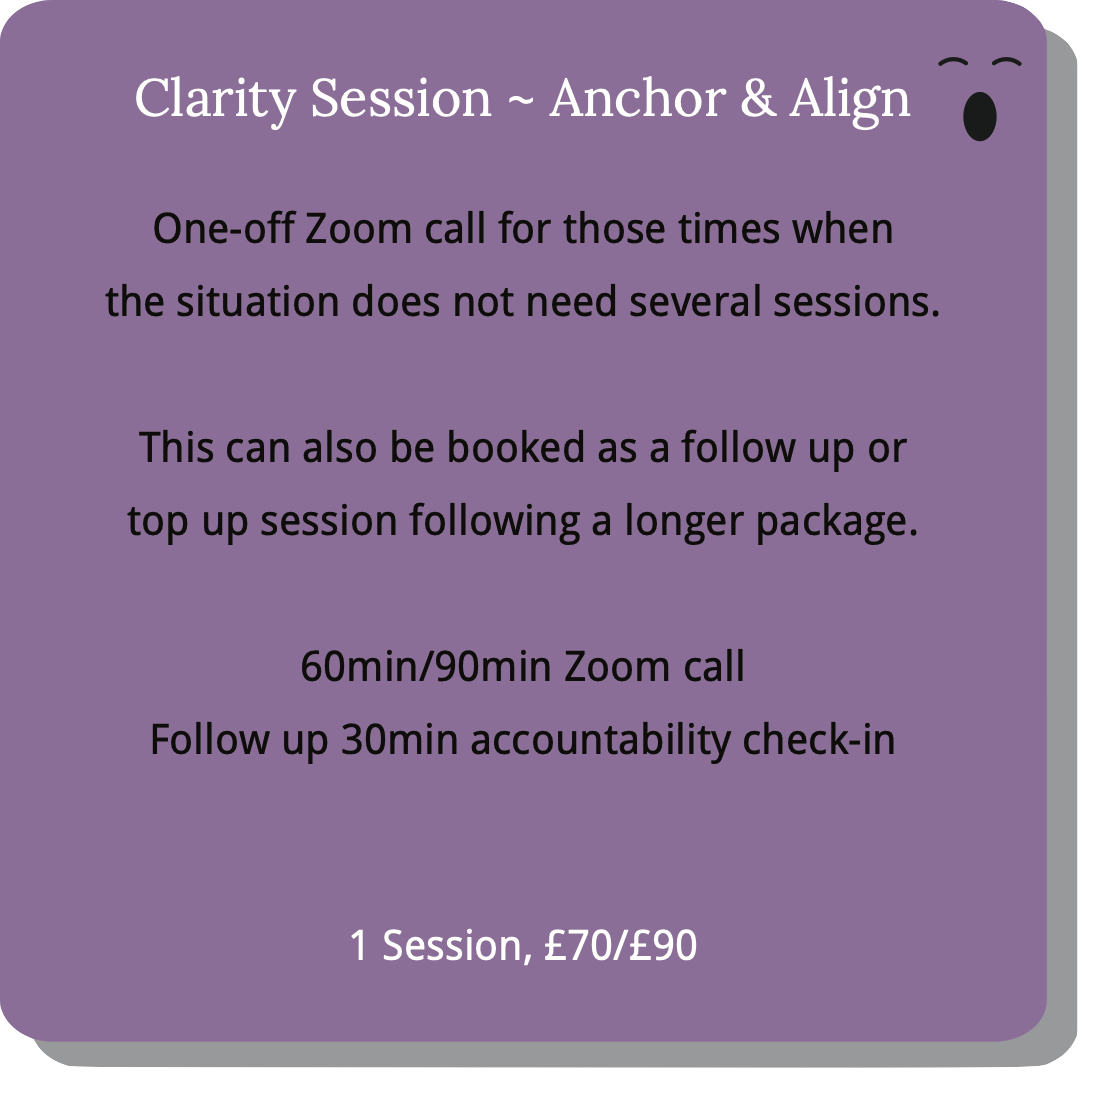 One-off clarity session package for parents to anchor and align.